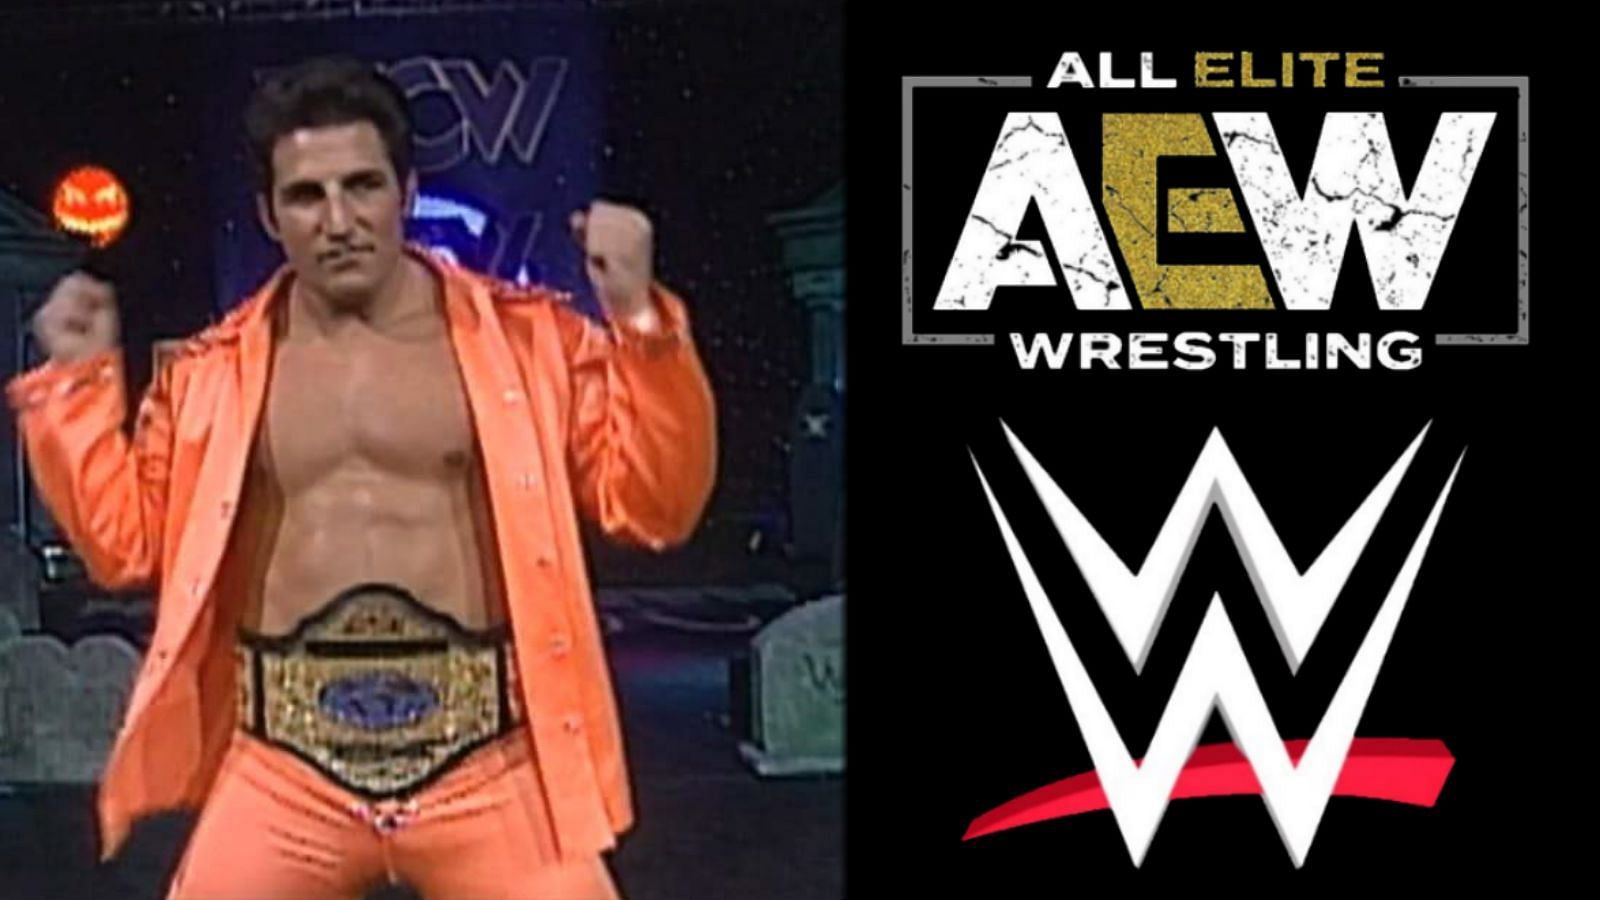 Disco Inferno has a few issues with AEW booking these legendary stars.